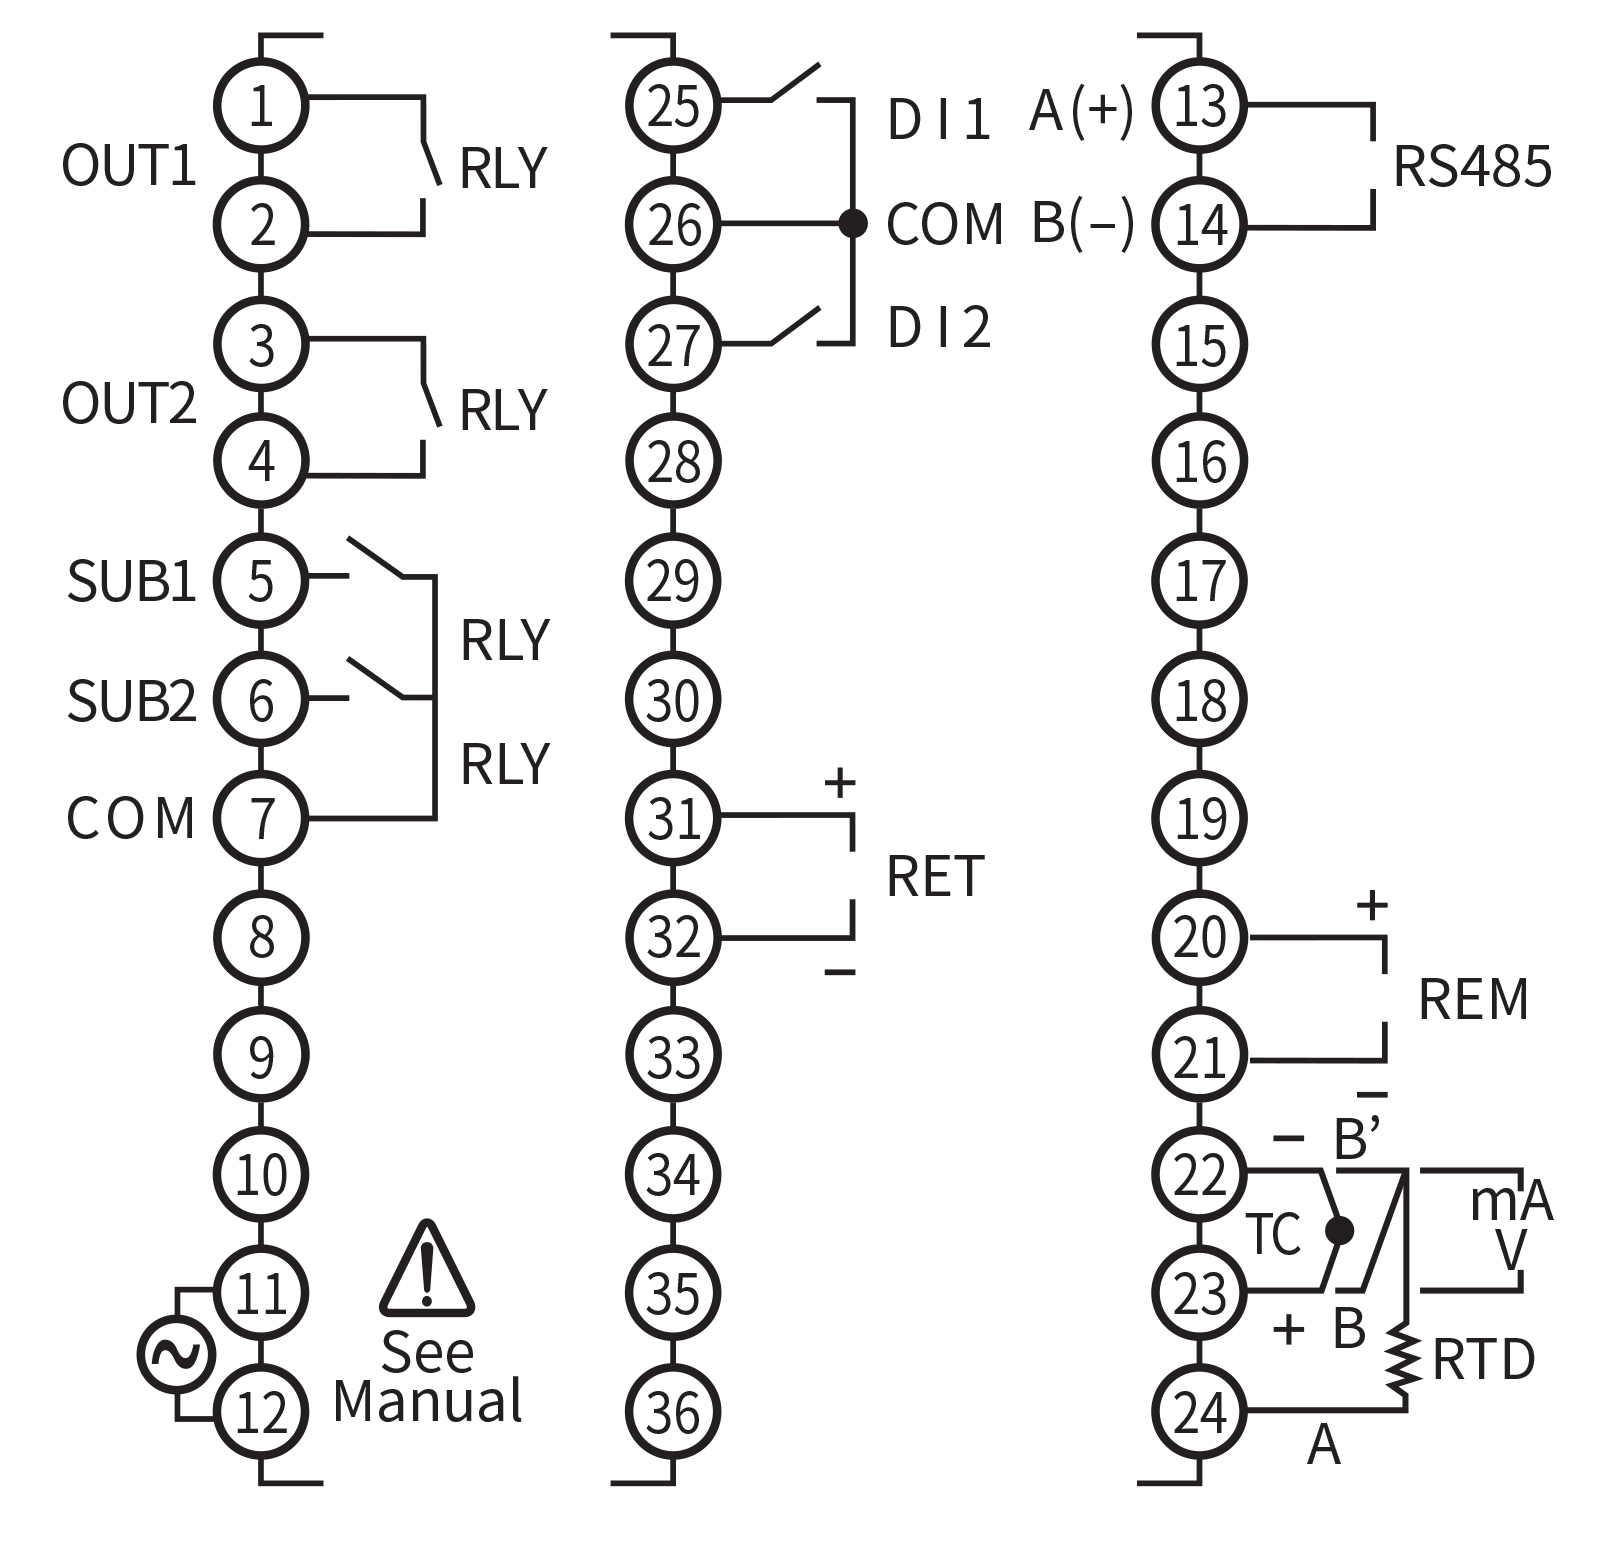 PD510-R (1/16 DIN) Connections